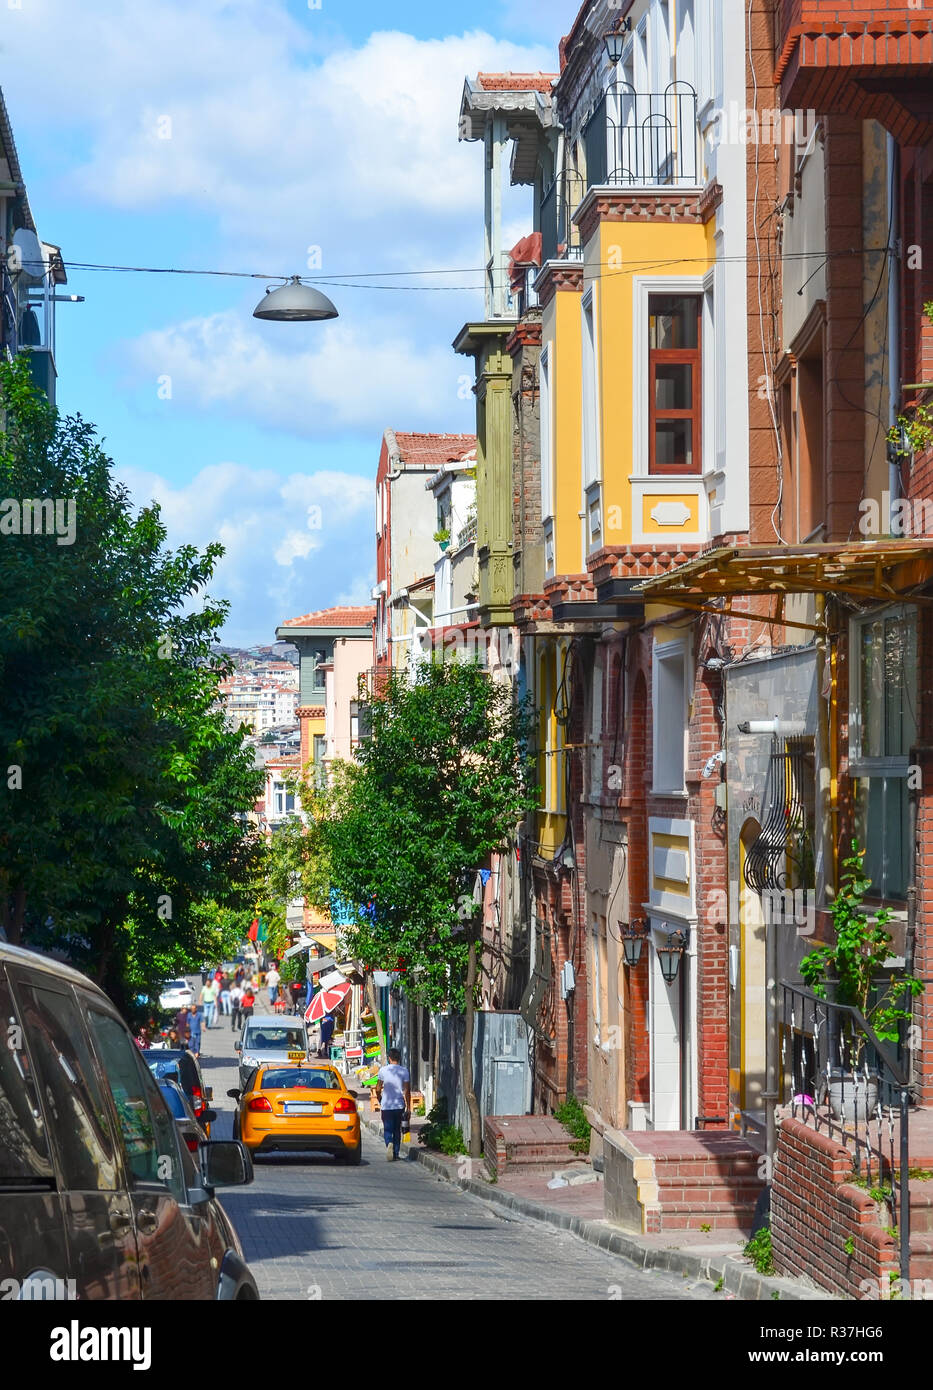 Balat quarter with colored houses in Istanbul - Turkey Stock Photo